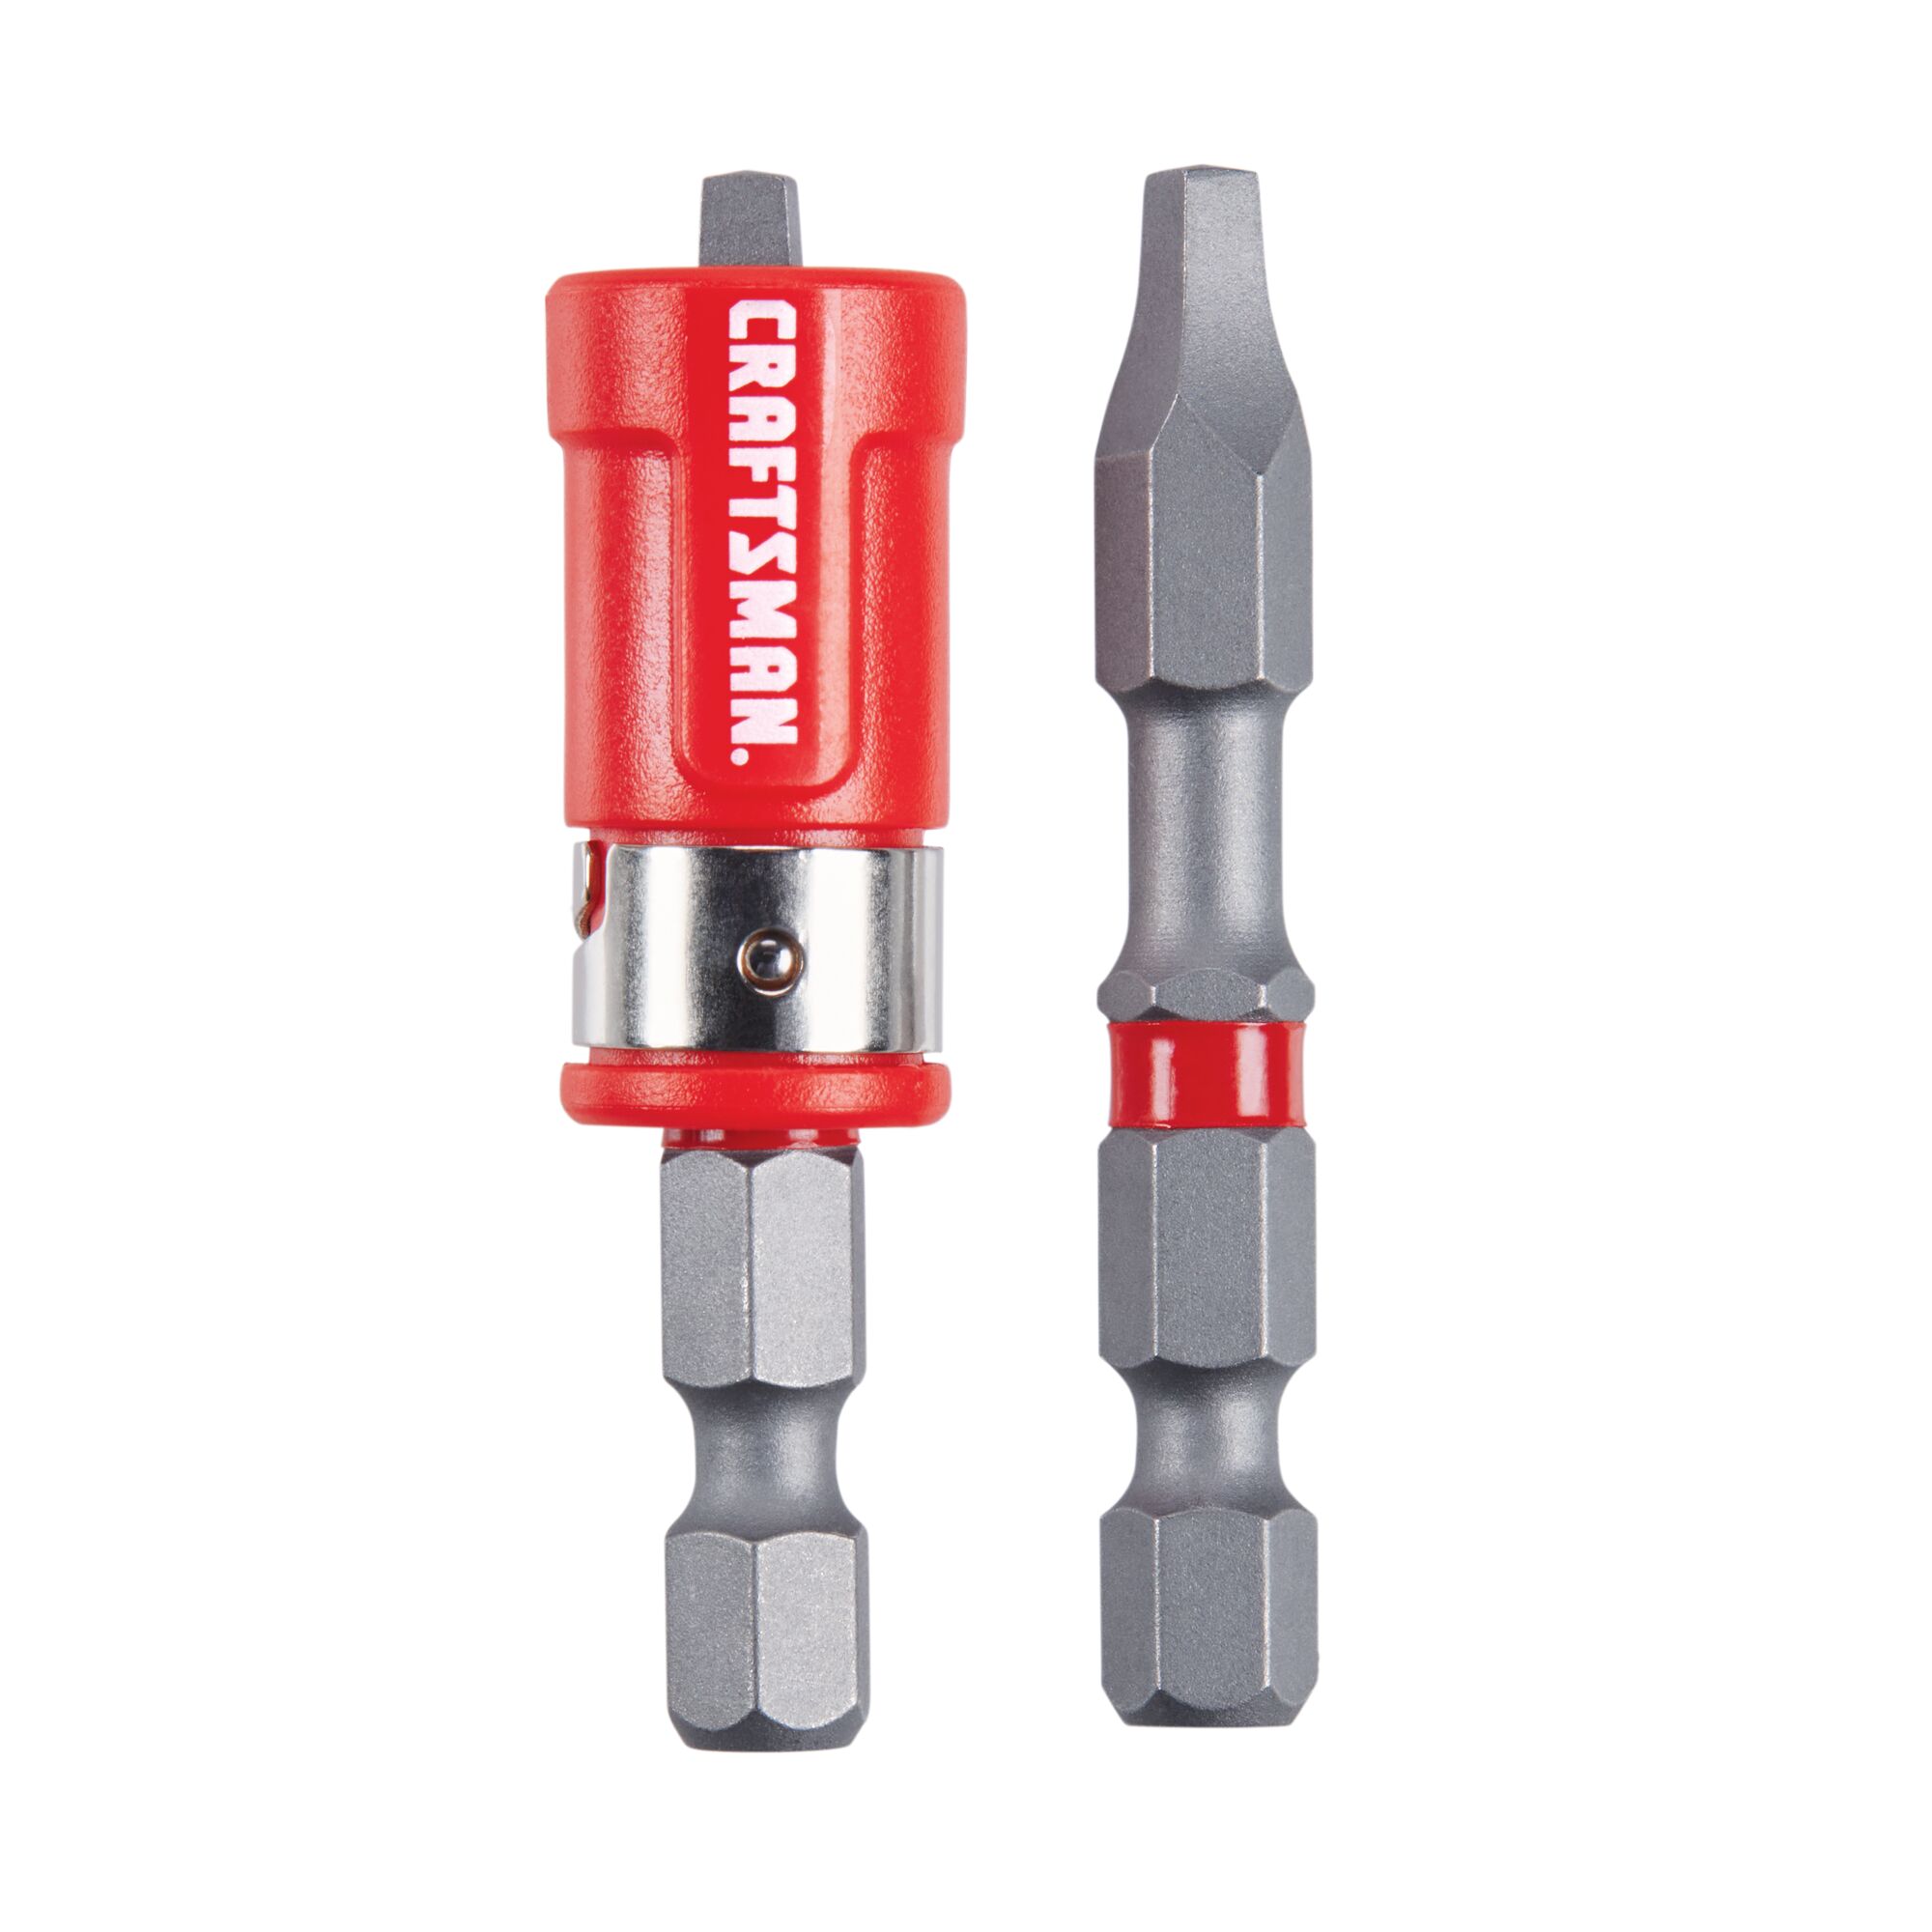 View of CRAFTSMAN Screwdrivers: Bits on white background